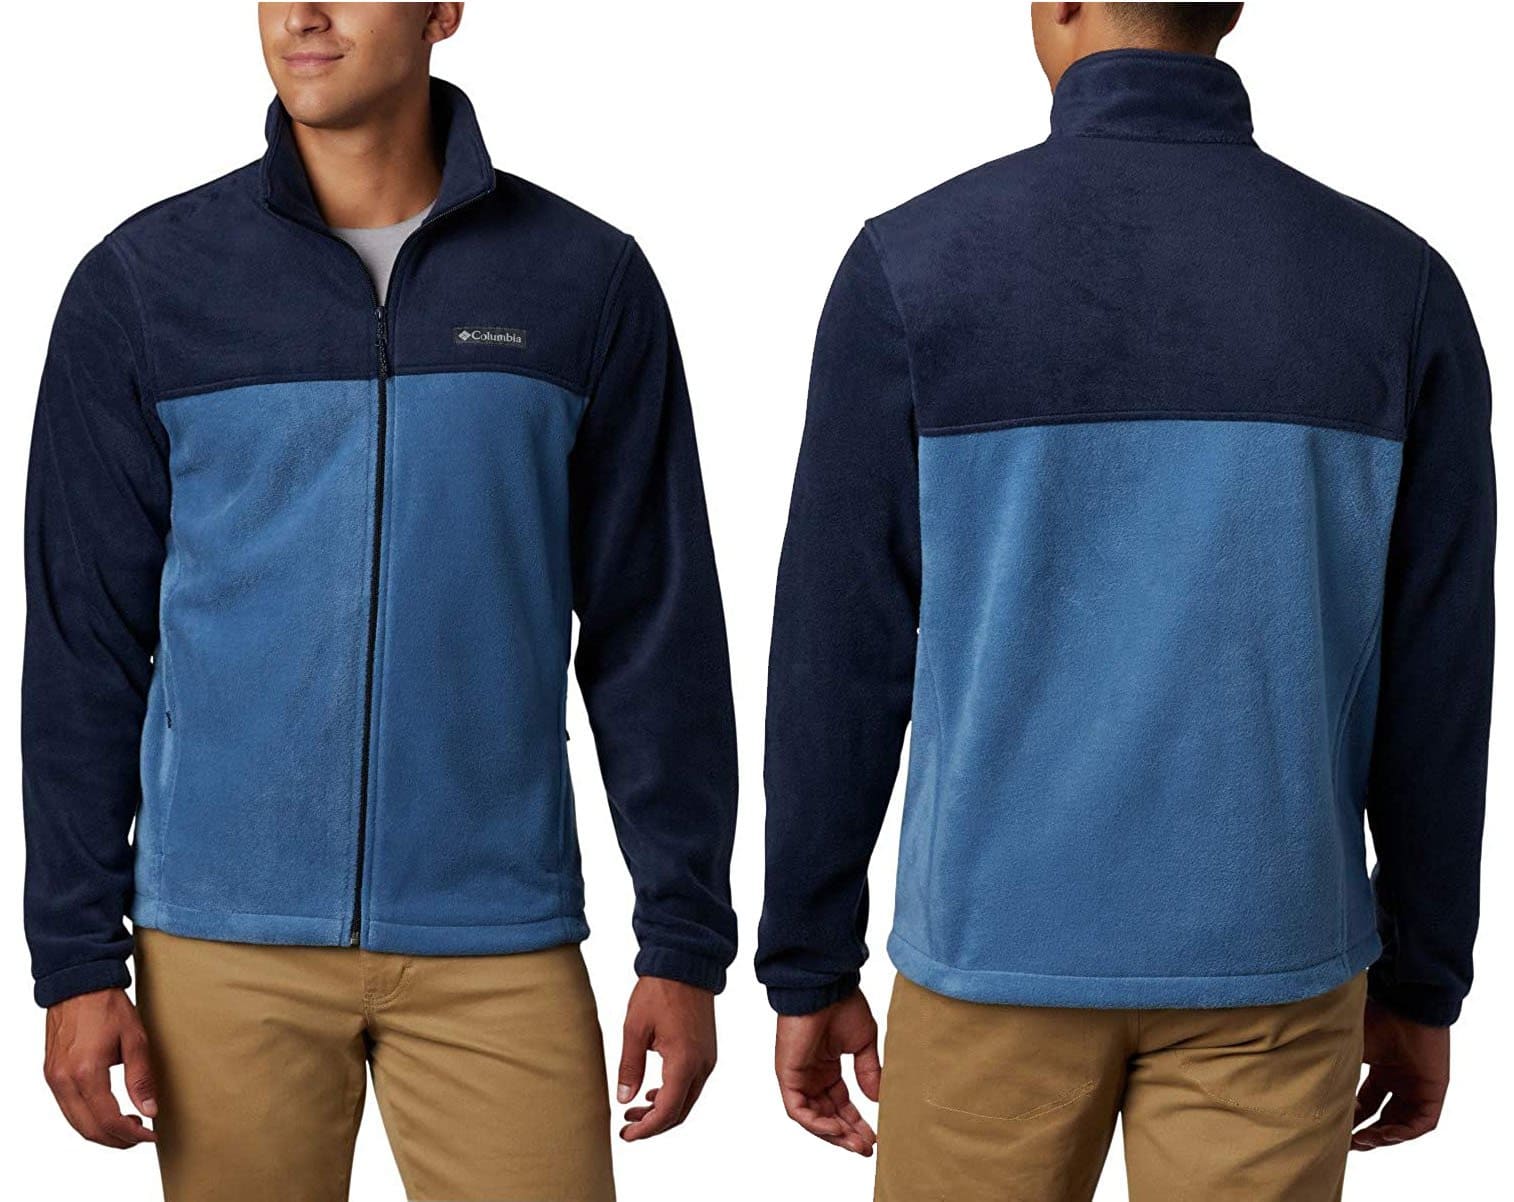 Columbia's Steens Mountain jacket is crafted from ultra-soft 100% polyester MTR filament fleece